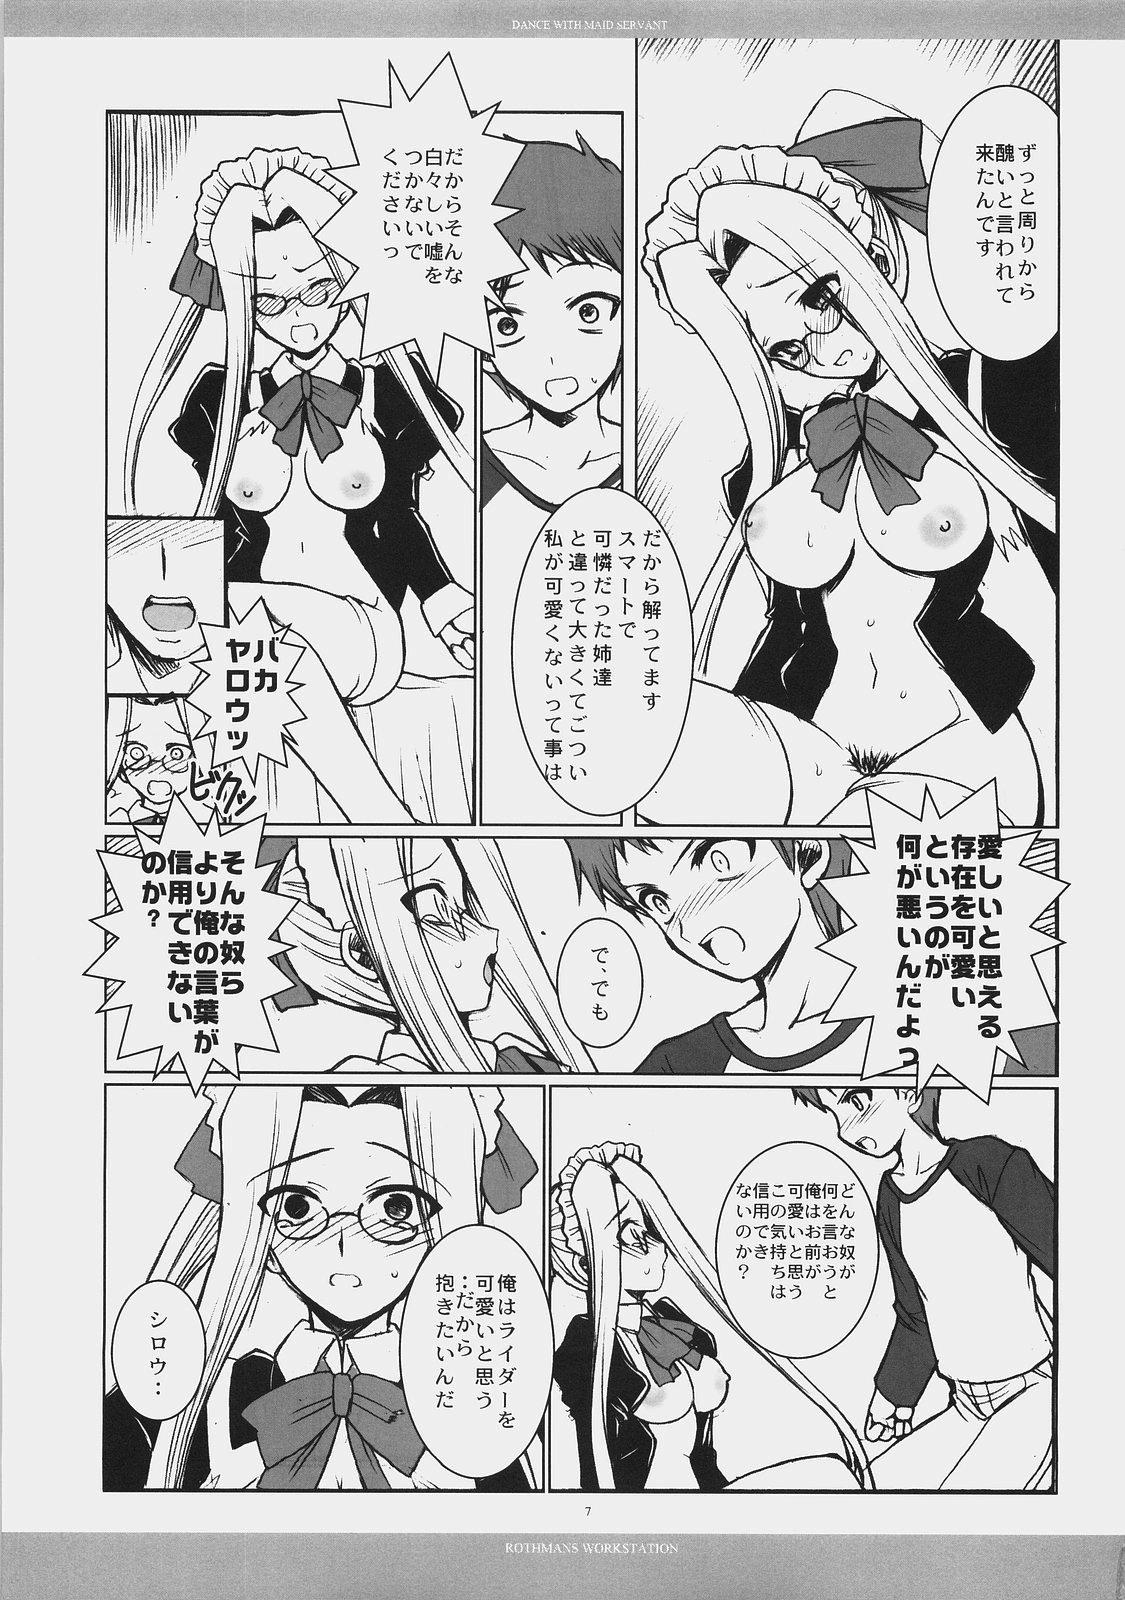 Good Dance with Maid Servant - Fate hollow ataraxia Deflowered - Page 6